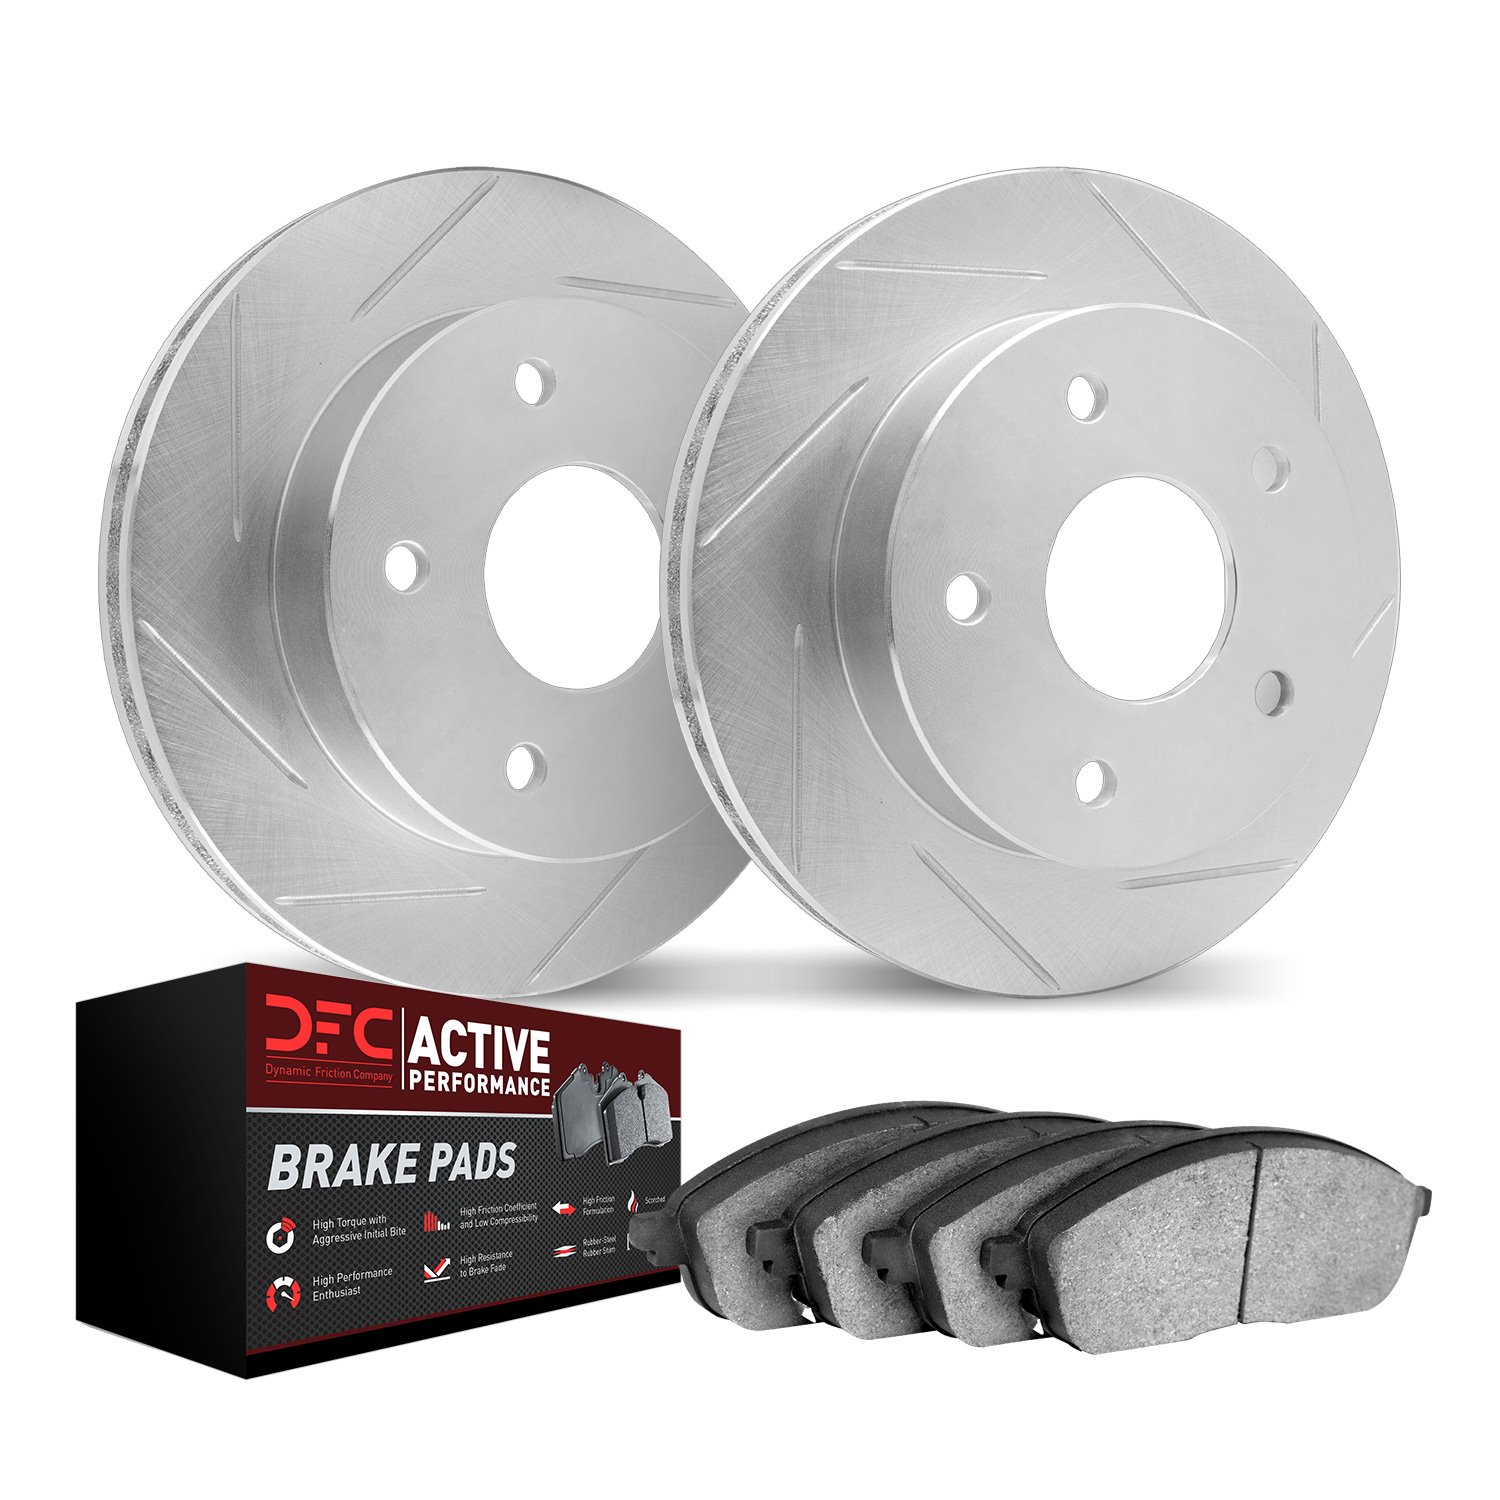 2702-02007 Geoperformance Slotted Brake Rotors with Active Performance Pads Kits, 1975-1983 Porsche, Position: Front